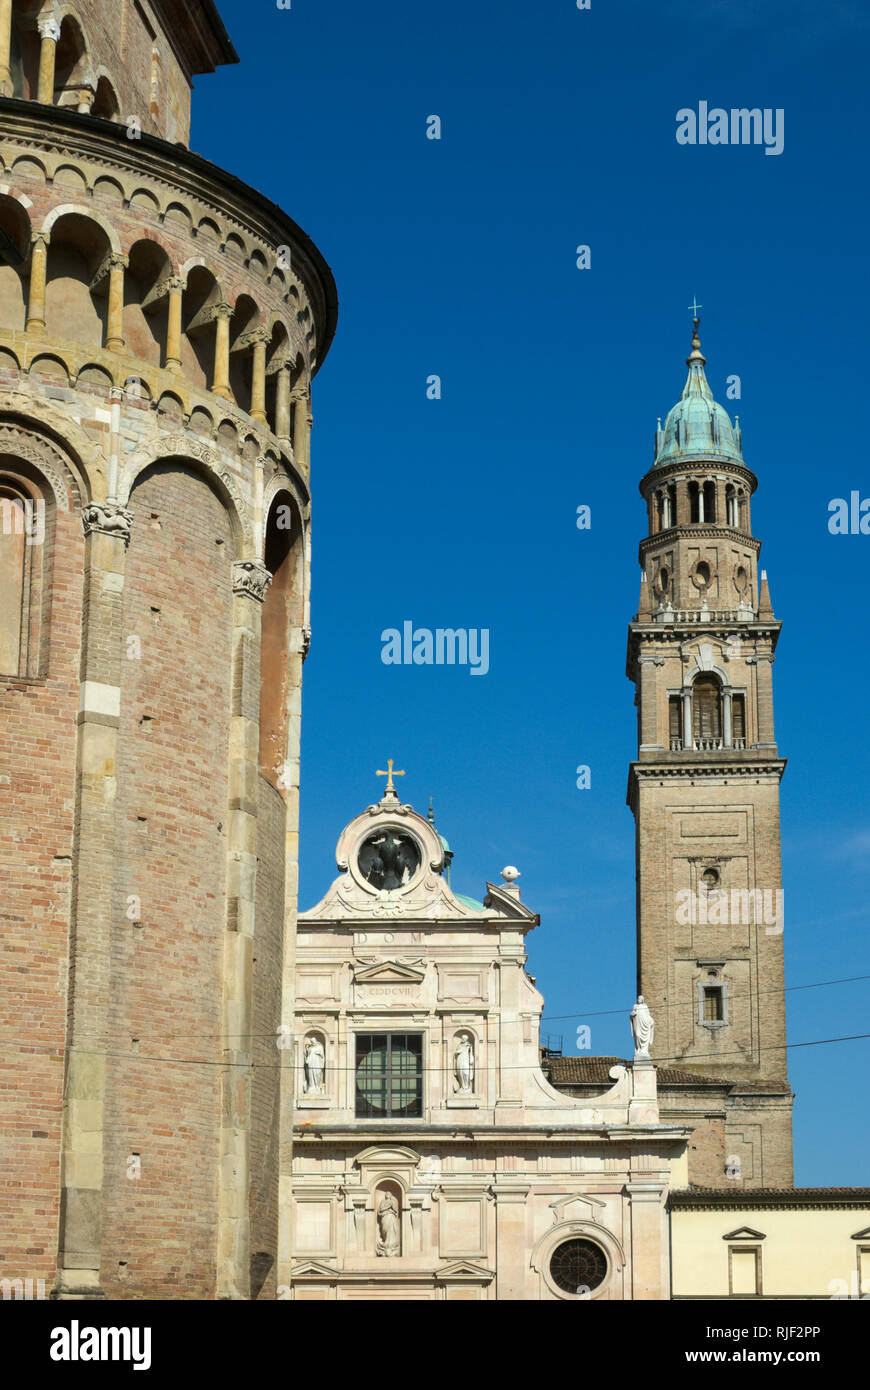 the baroque church of Saint John the Evangelist and part of Duomo (cathedral) on left, Parma, Emilia Romagna, Italy Stock Photo